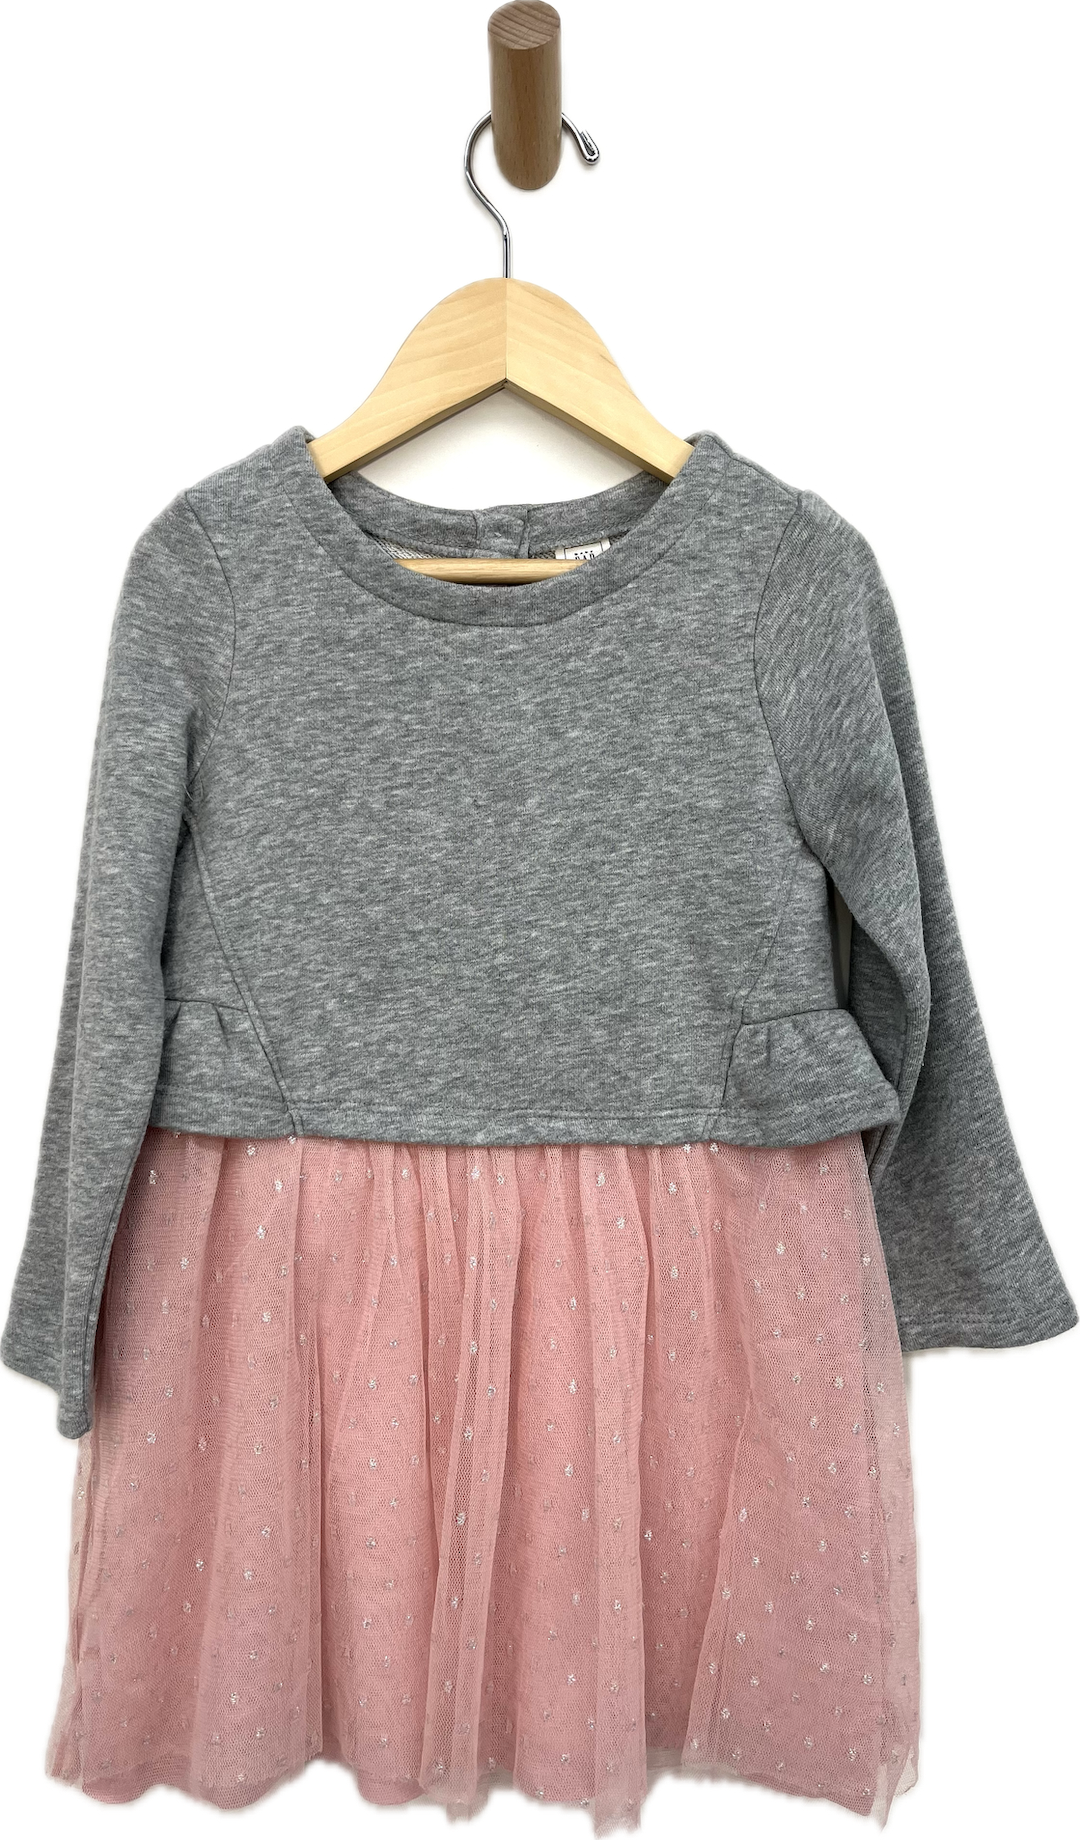 gap grey long sleeve dress with pink tulle 4T